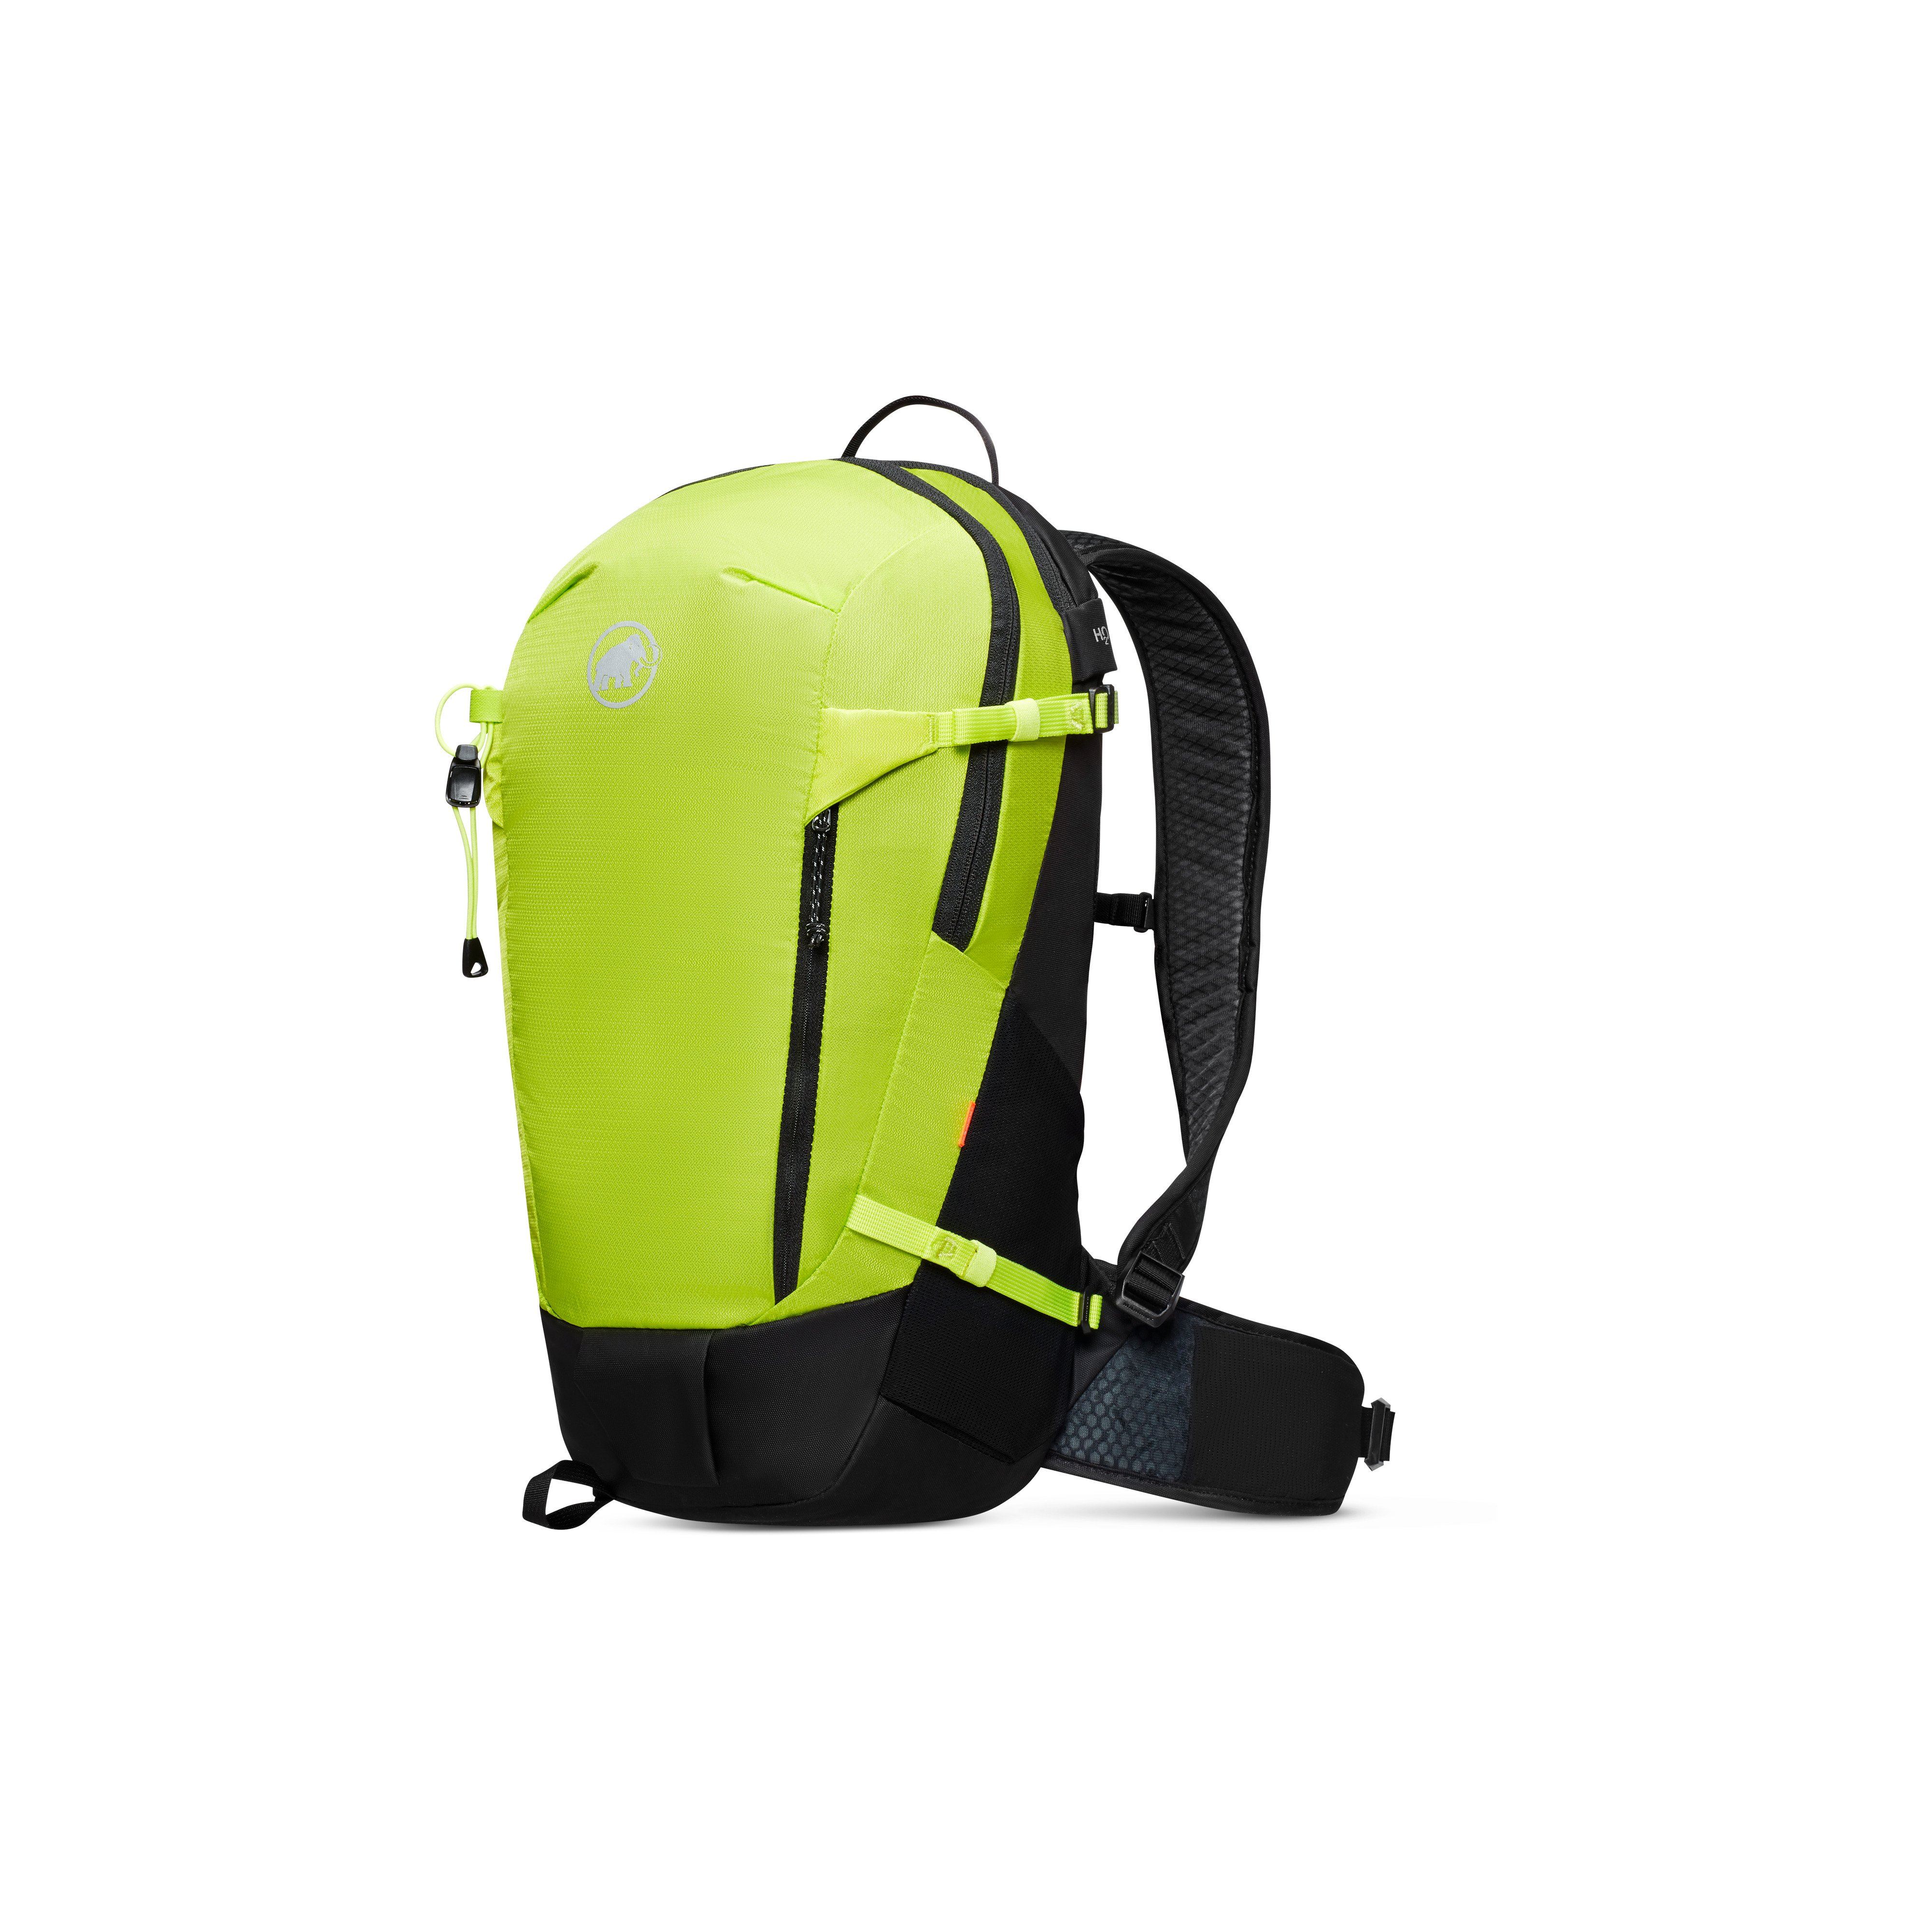 Lithium 20 - highlime-black, 20 L product image